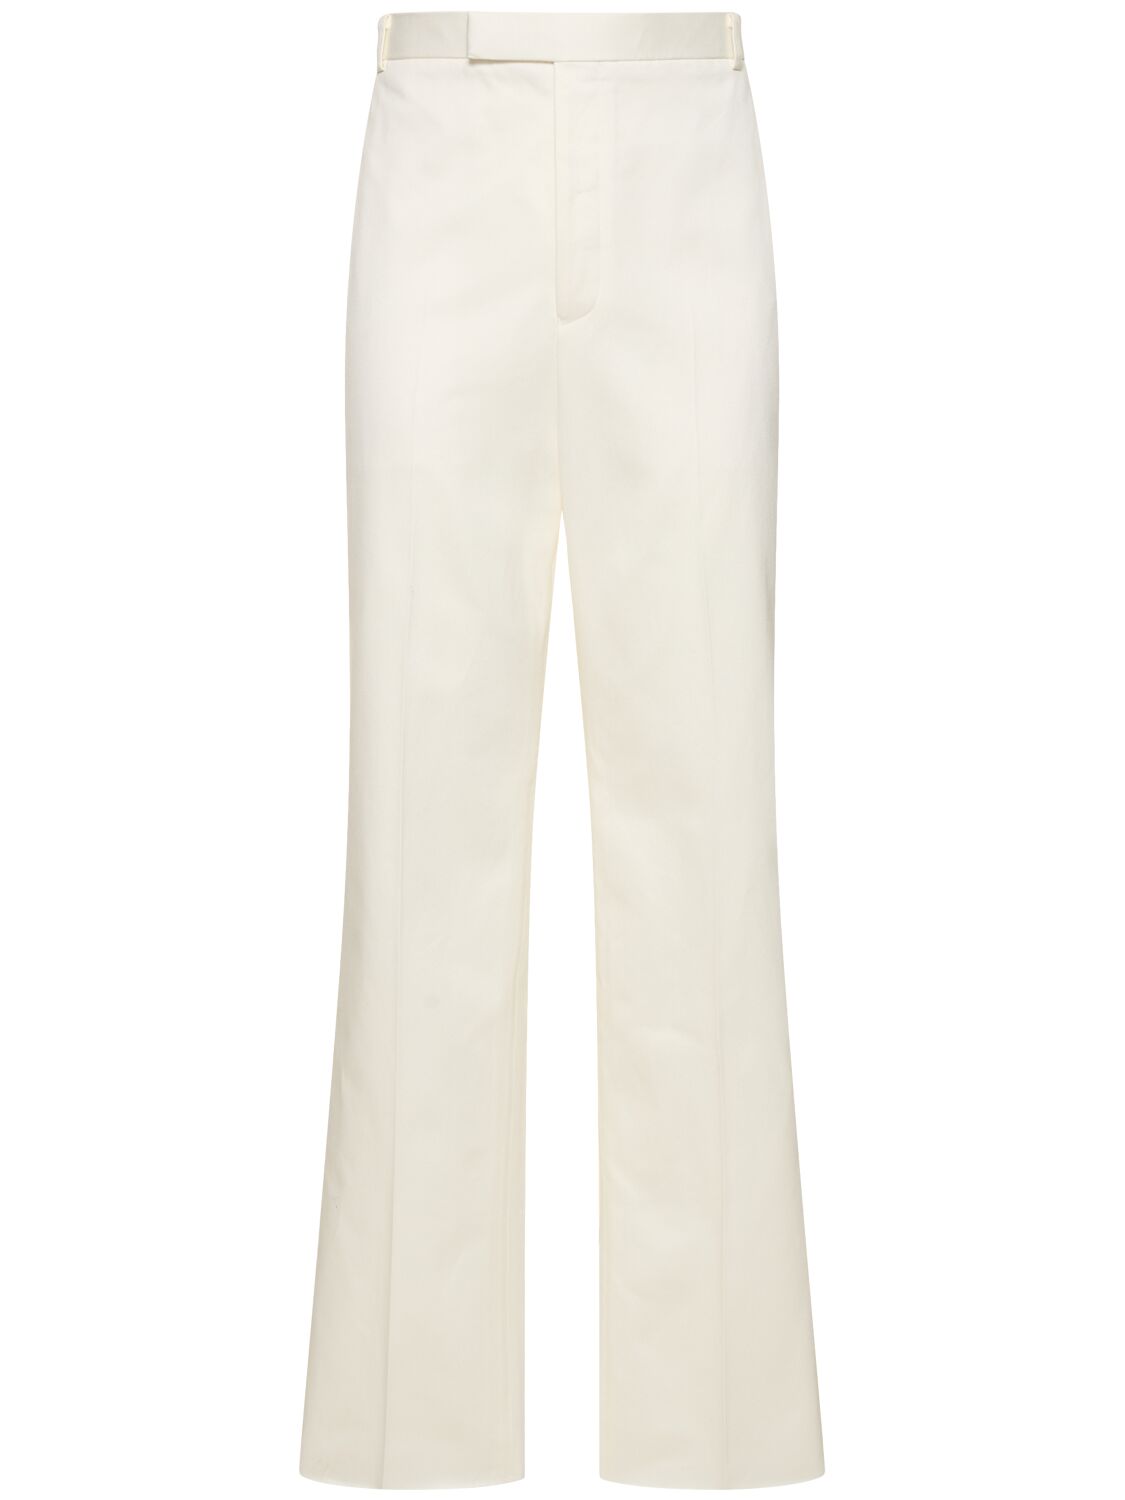 Thom Browne Mid Rise Straight Leg Chino Pants In White